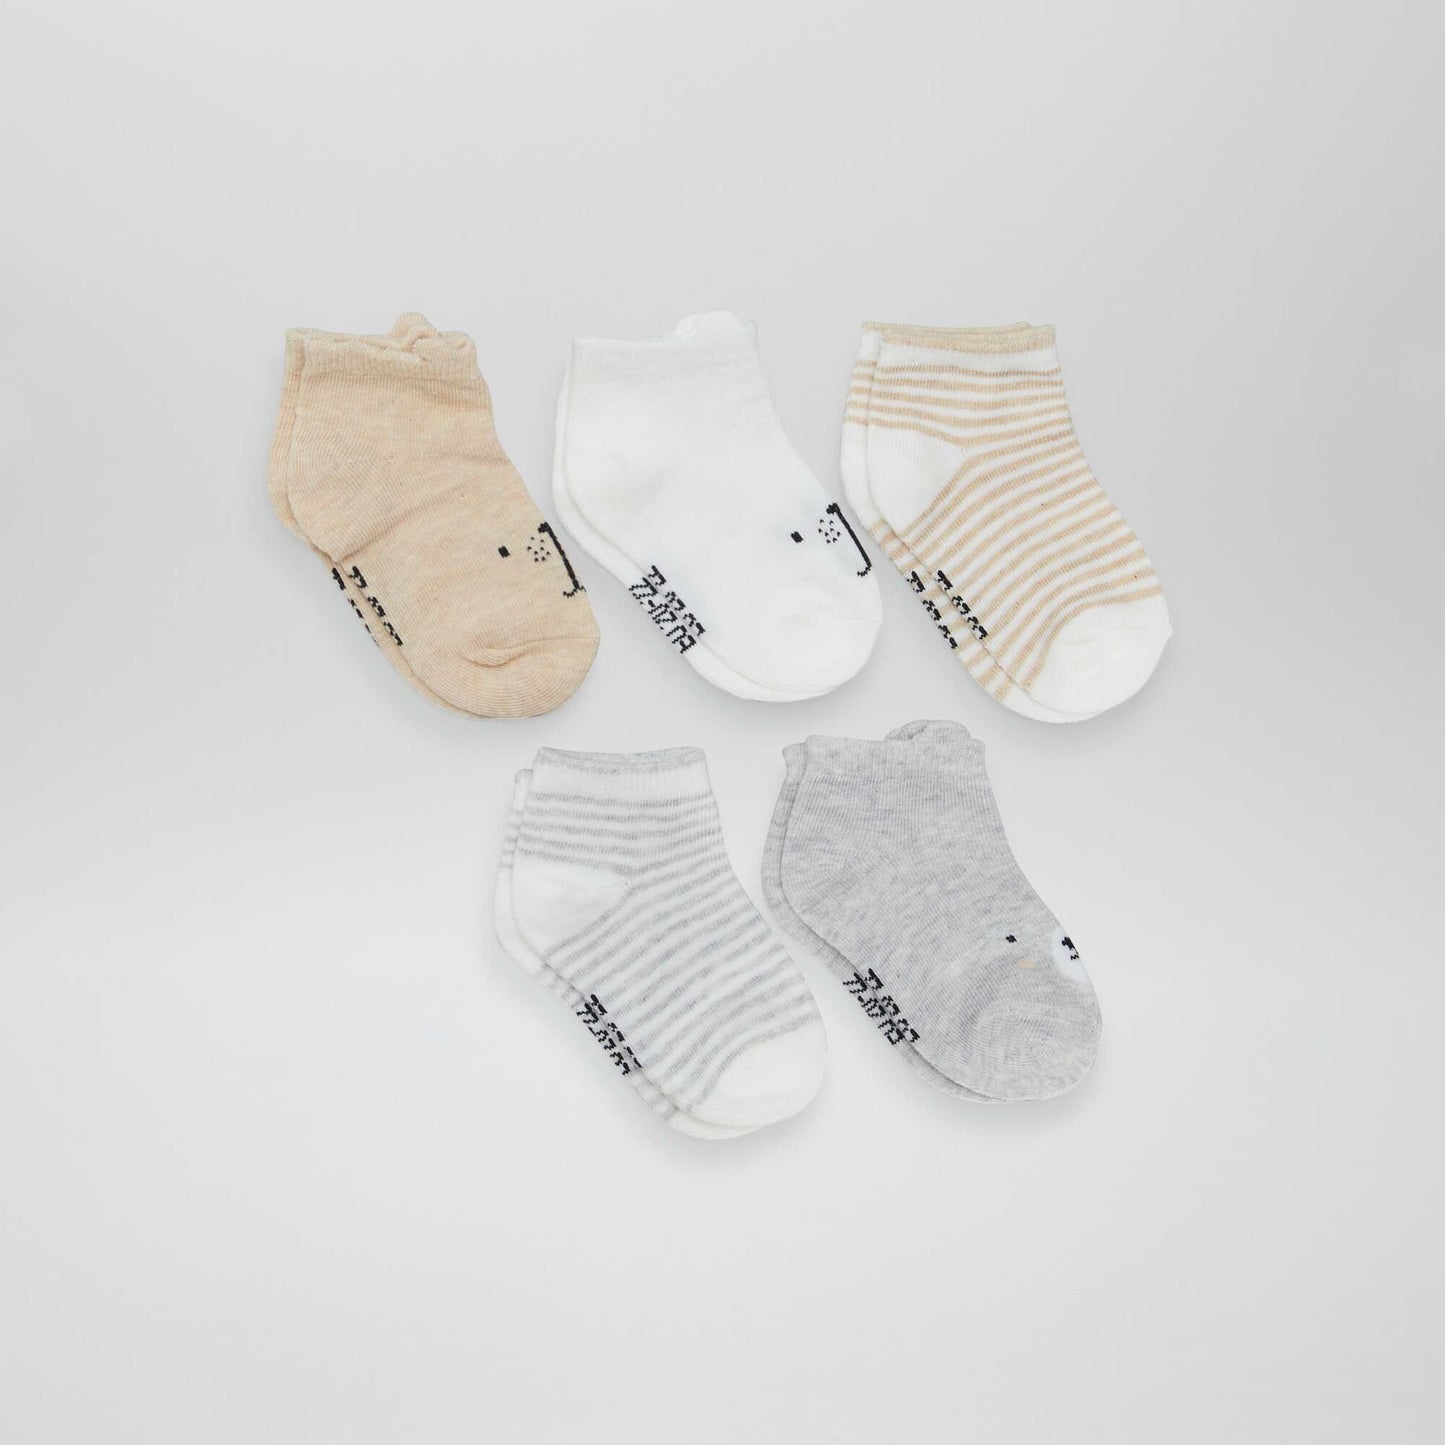 Pack of 5 pairs of invisible socks GREY